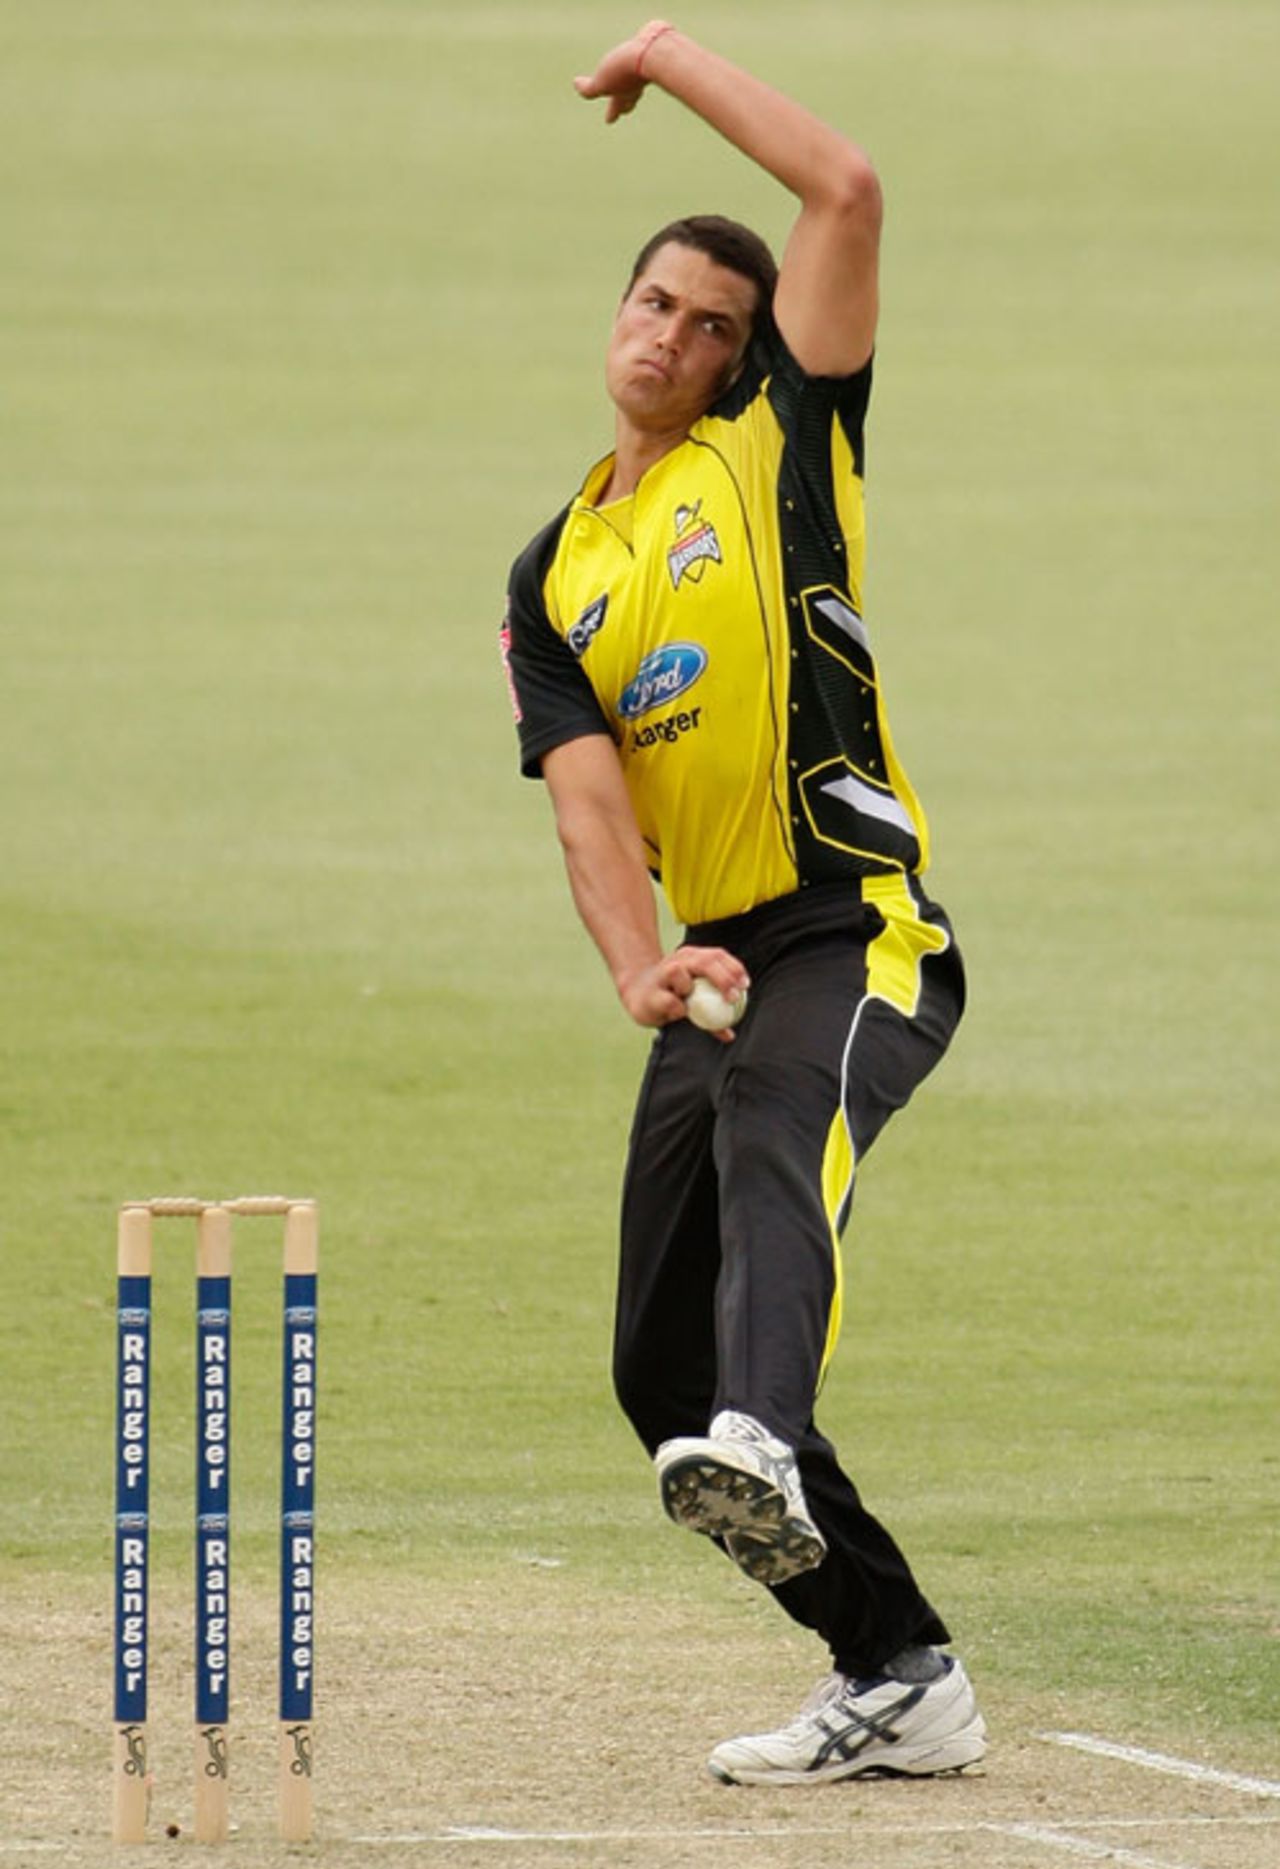 Nathan Coulter-Nile grabbed three wickets, Western Australia v South Australia, FR Cup, Perth, 6 February, 2010